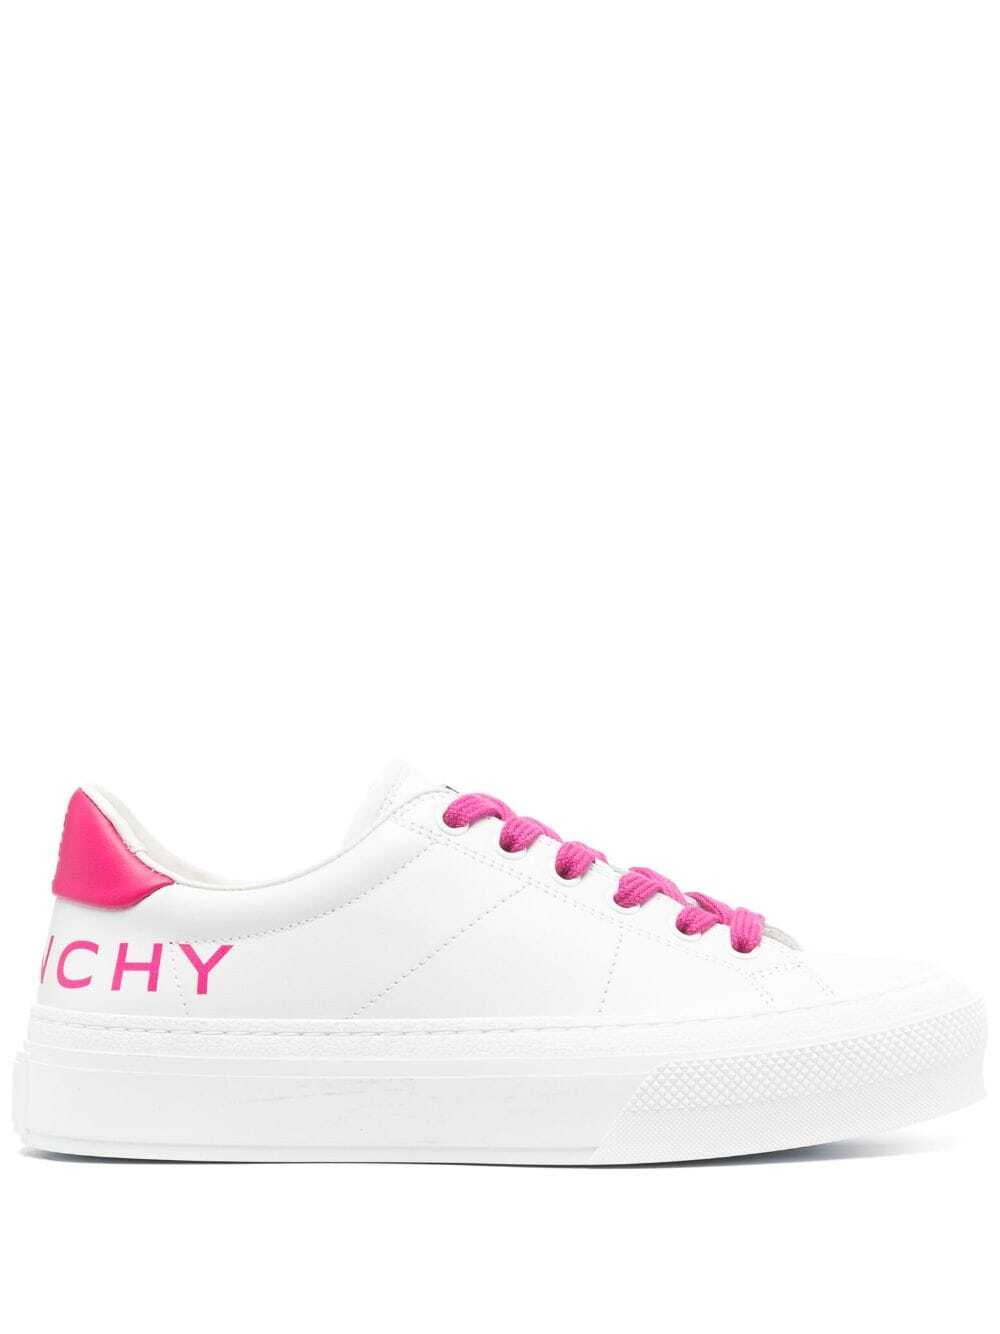 Givenchy Sneakers White White image4